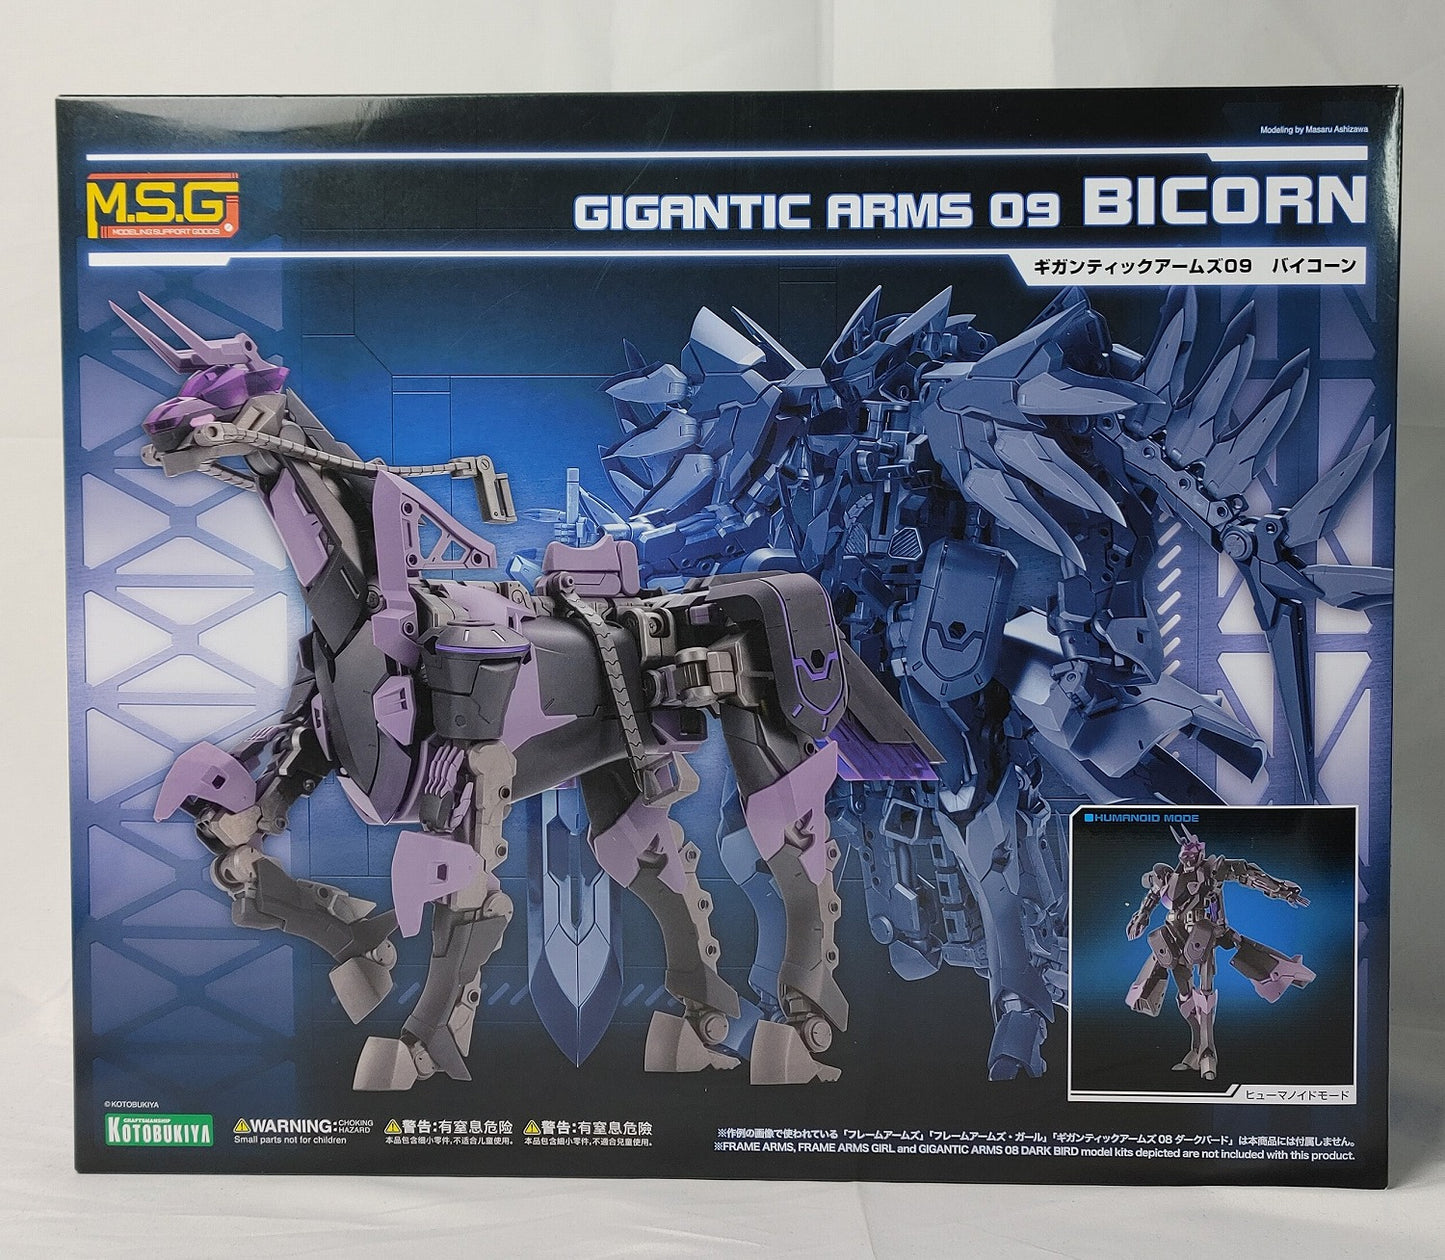 M.S.G Modeling Support Goods Gigantic Arms 09 Bicorn